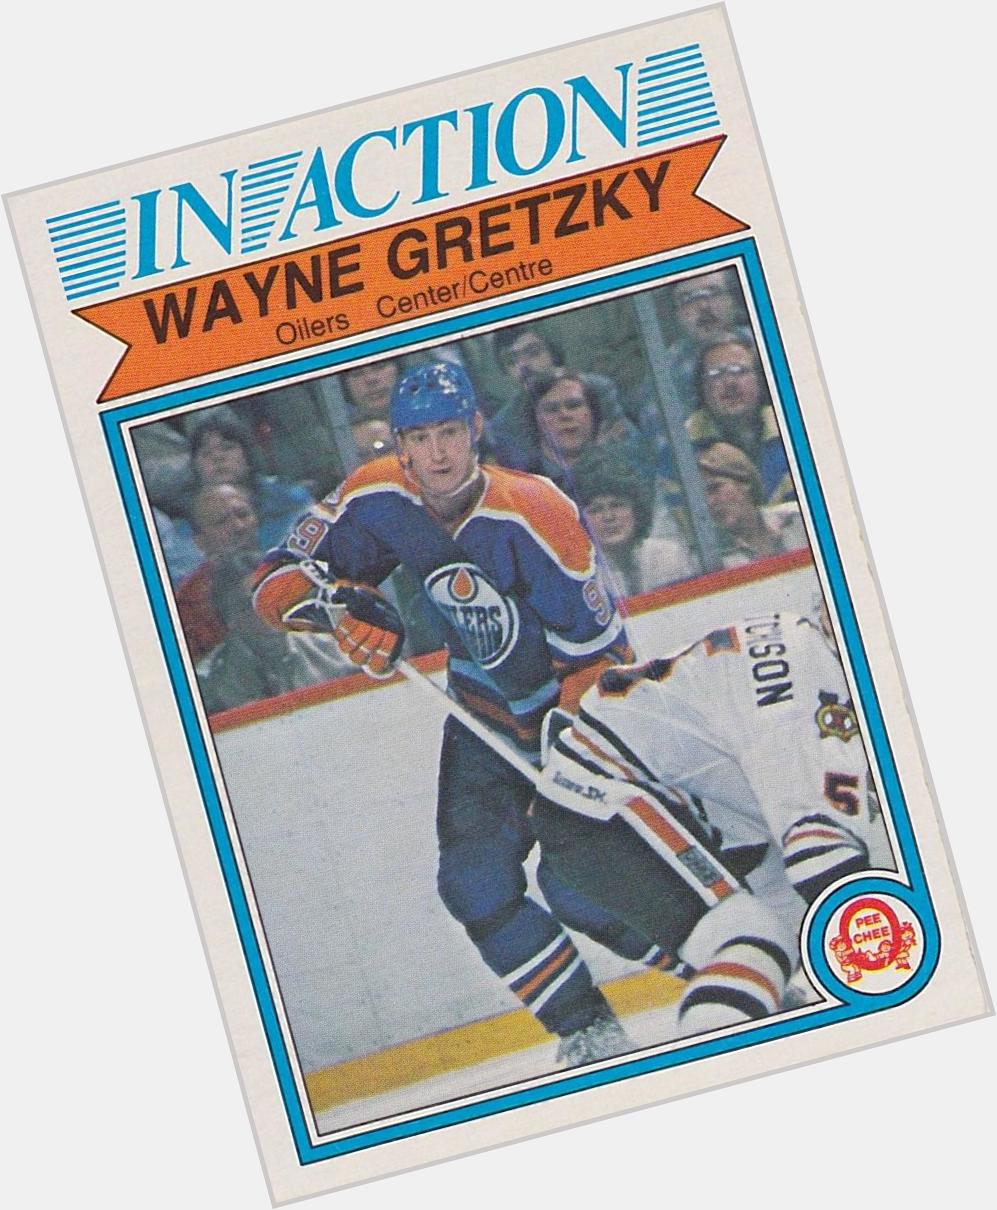 Happy Birthday Wayne Gretzky! He scored 7 trillion points in his NHL career. 